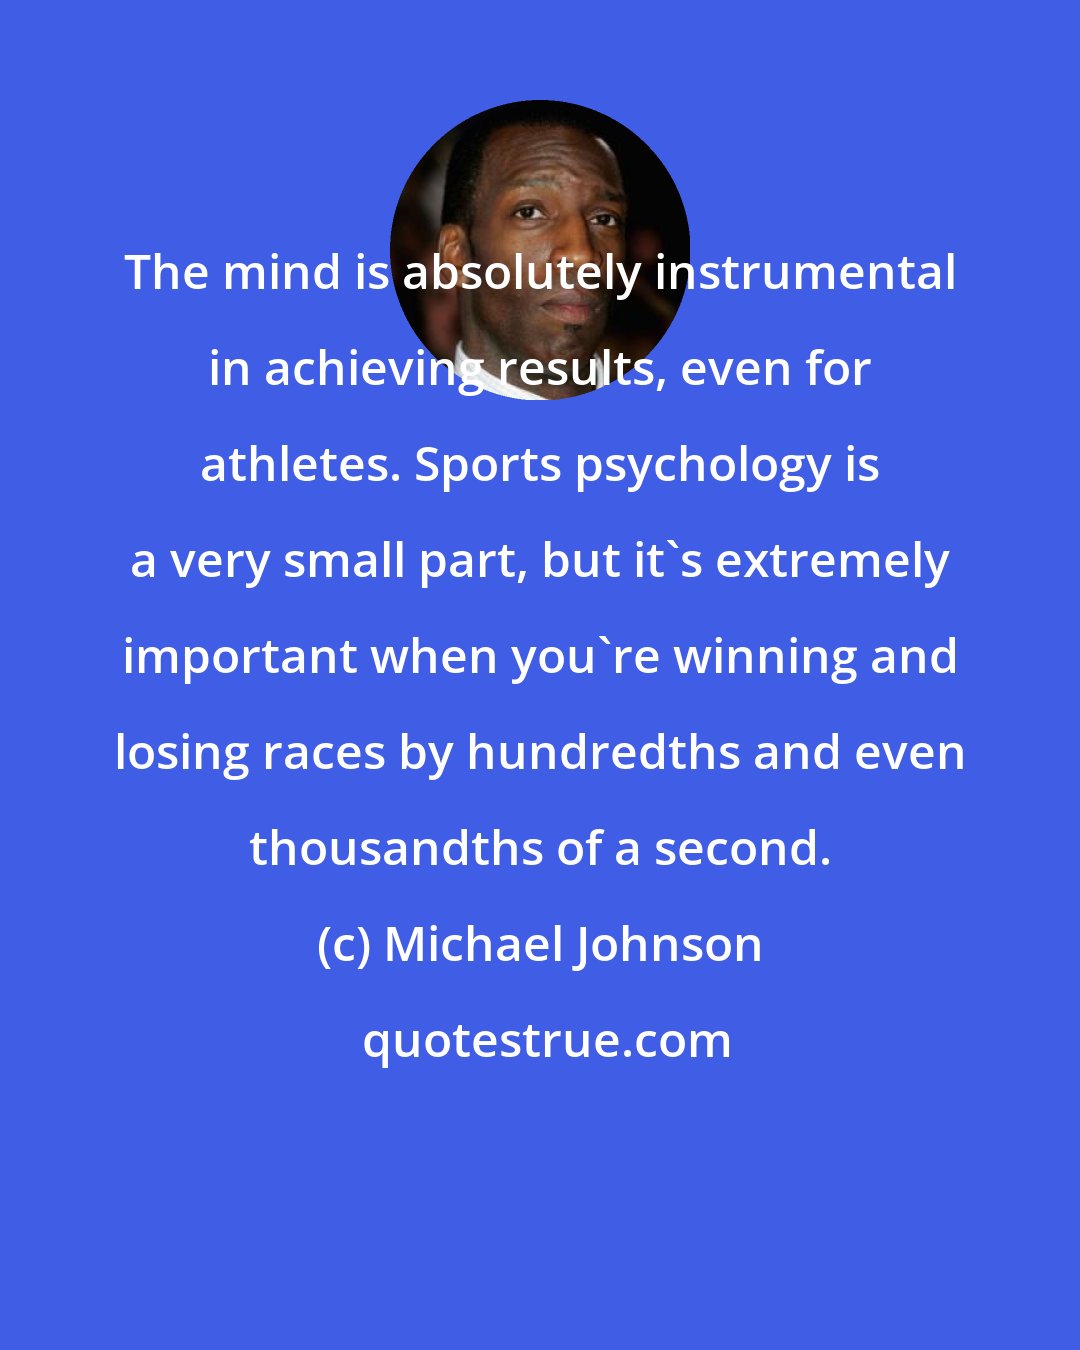 Michael Johnson: The mind is absolutely instrumental in achieving results, even for athletes. Sports psychology is a very small part, but it's extremely important when you're winning and losing races by hundredths and even thousandths of a second.